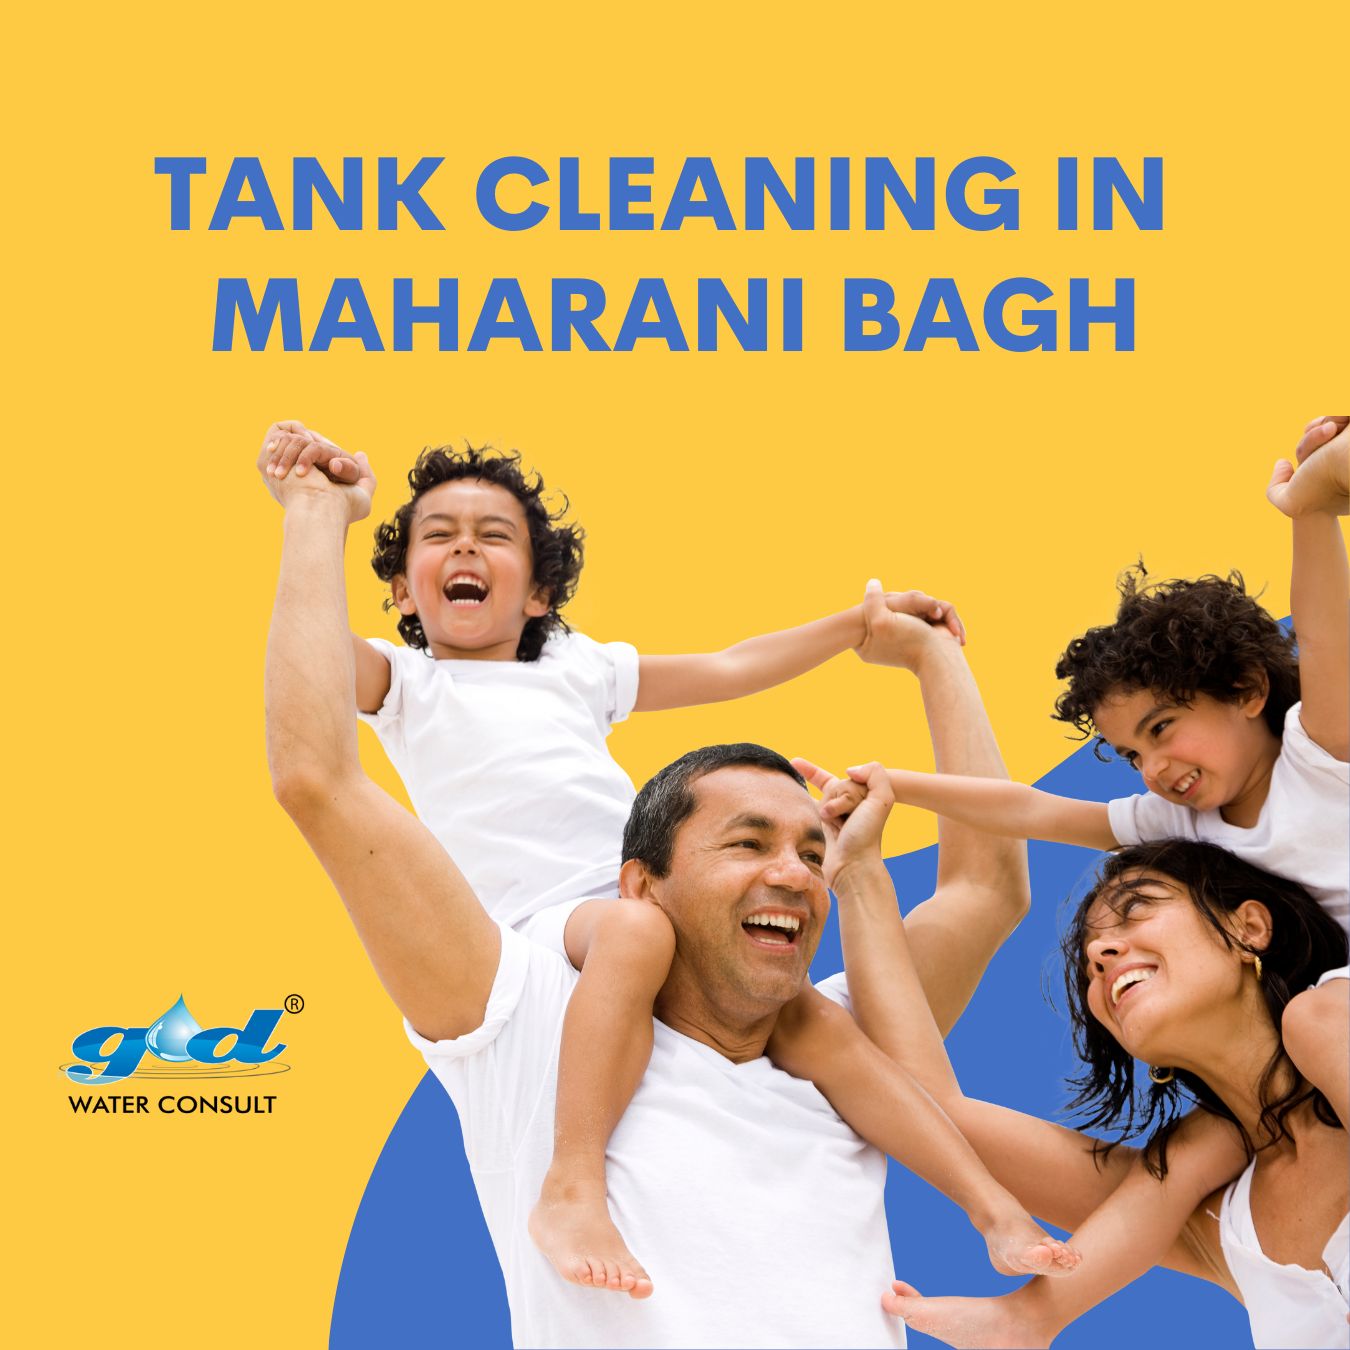 Why People Chose Non-Invasive Tank Cleaning in Maharani Bagh? GD Comments